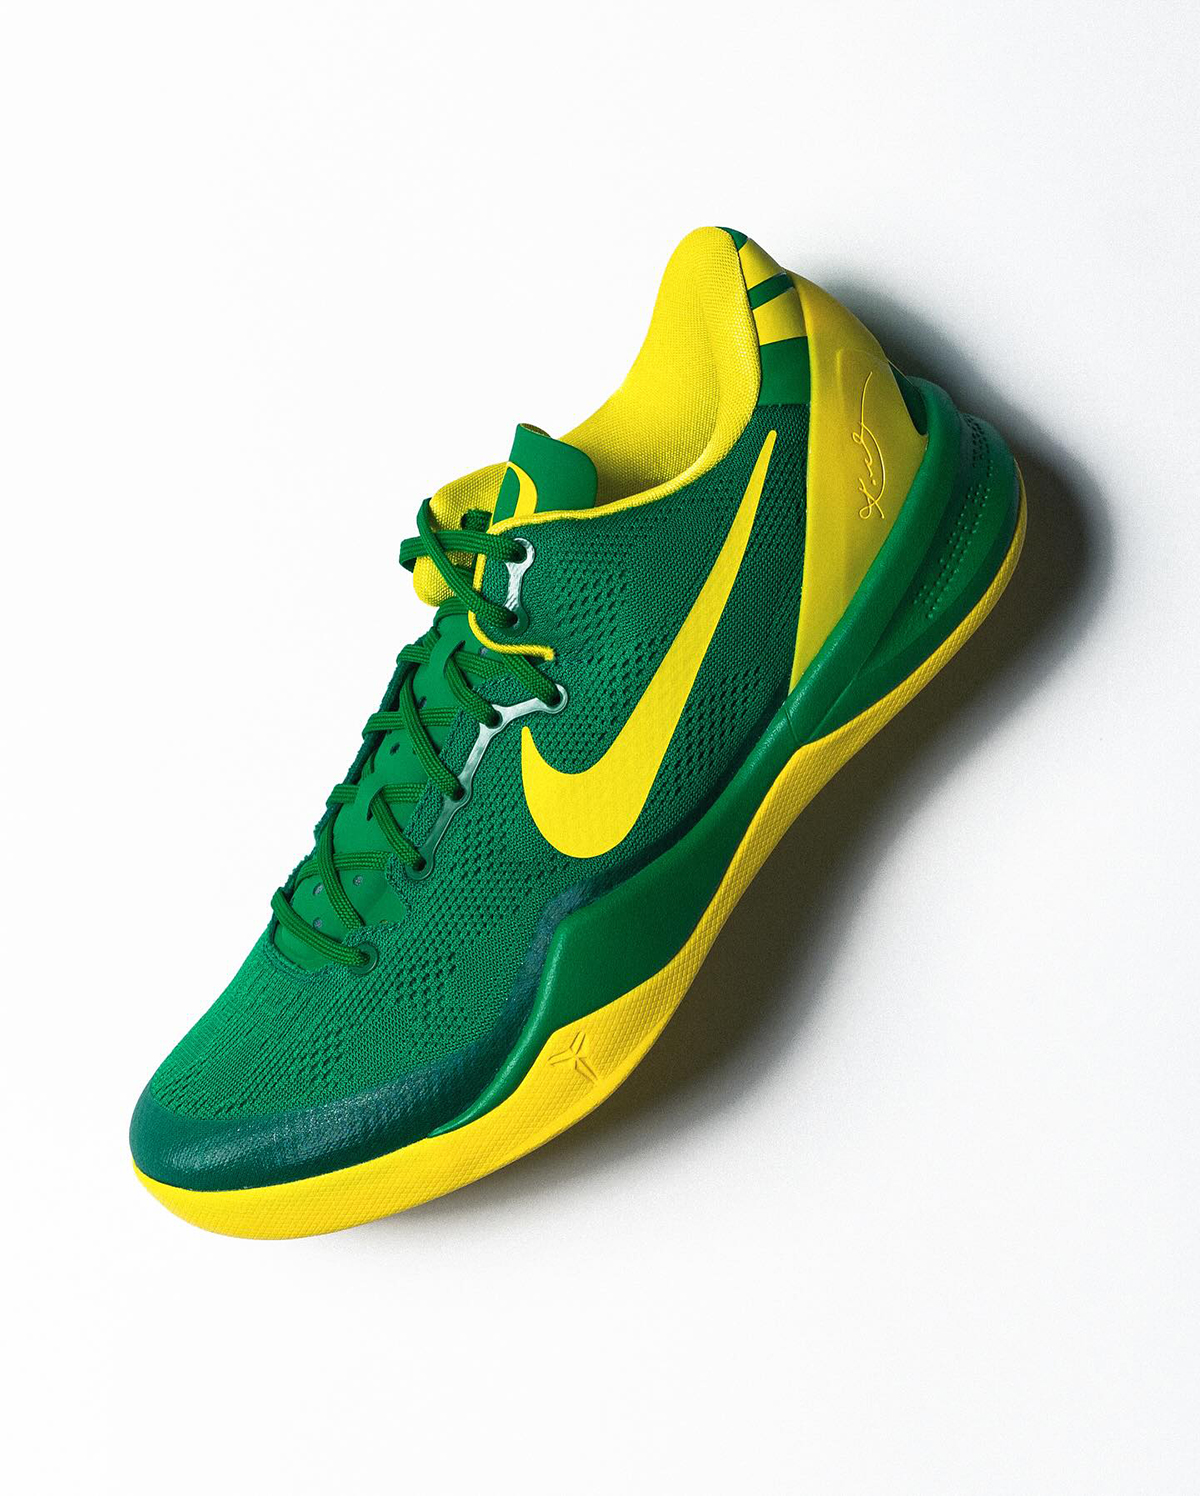 Kyrie Irving has a special connection to number 11 Protro Oregon Ducks Pe 4